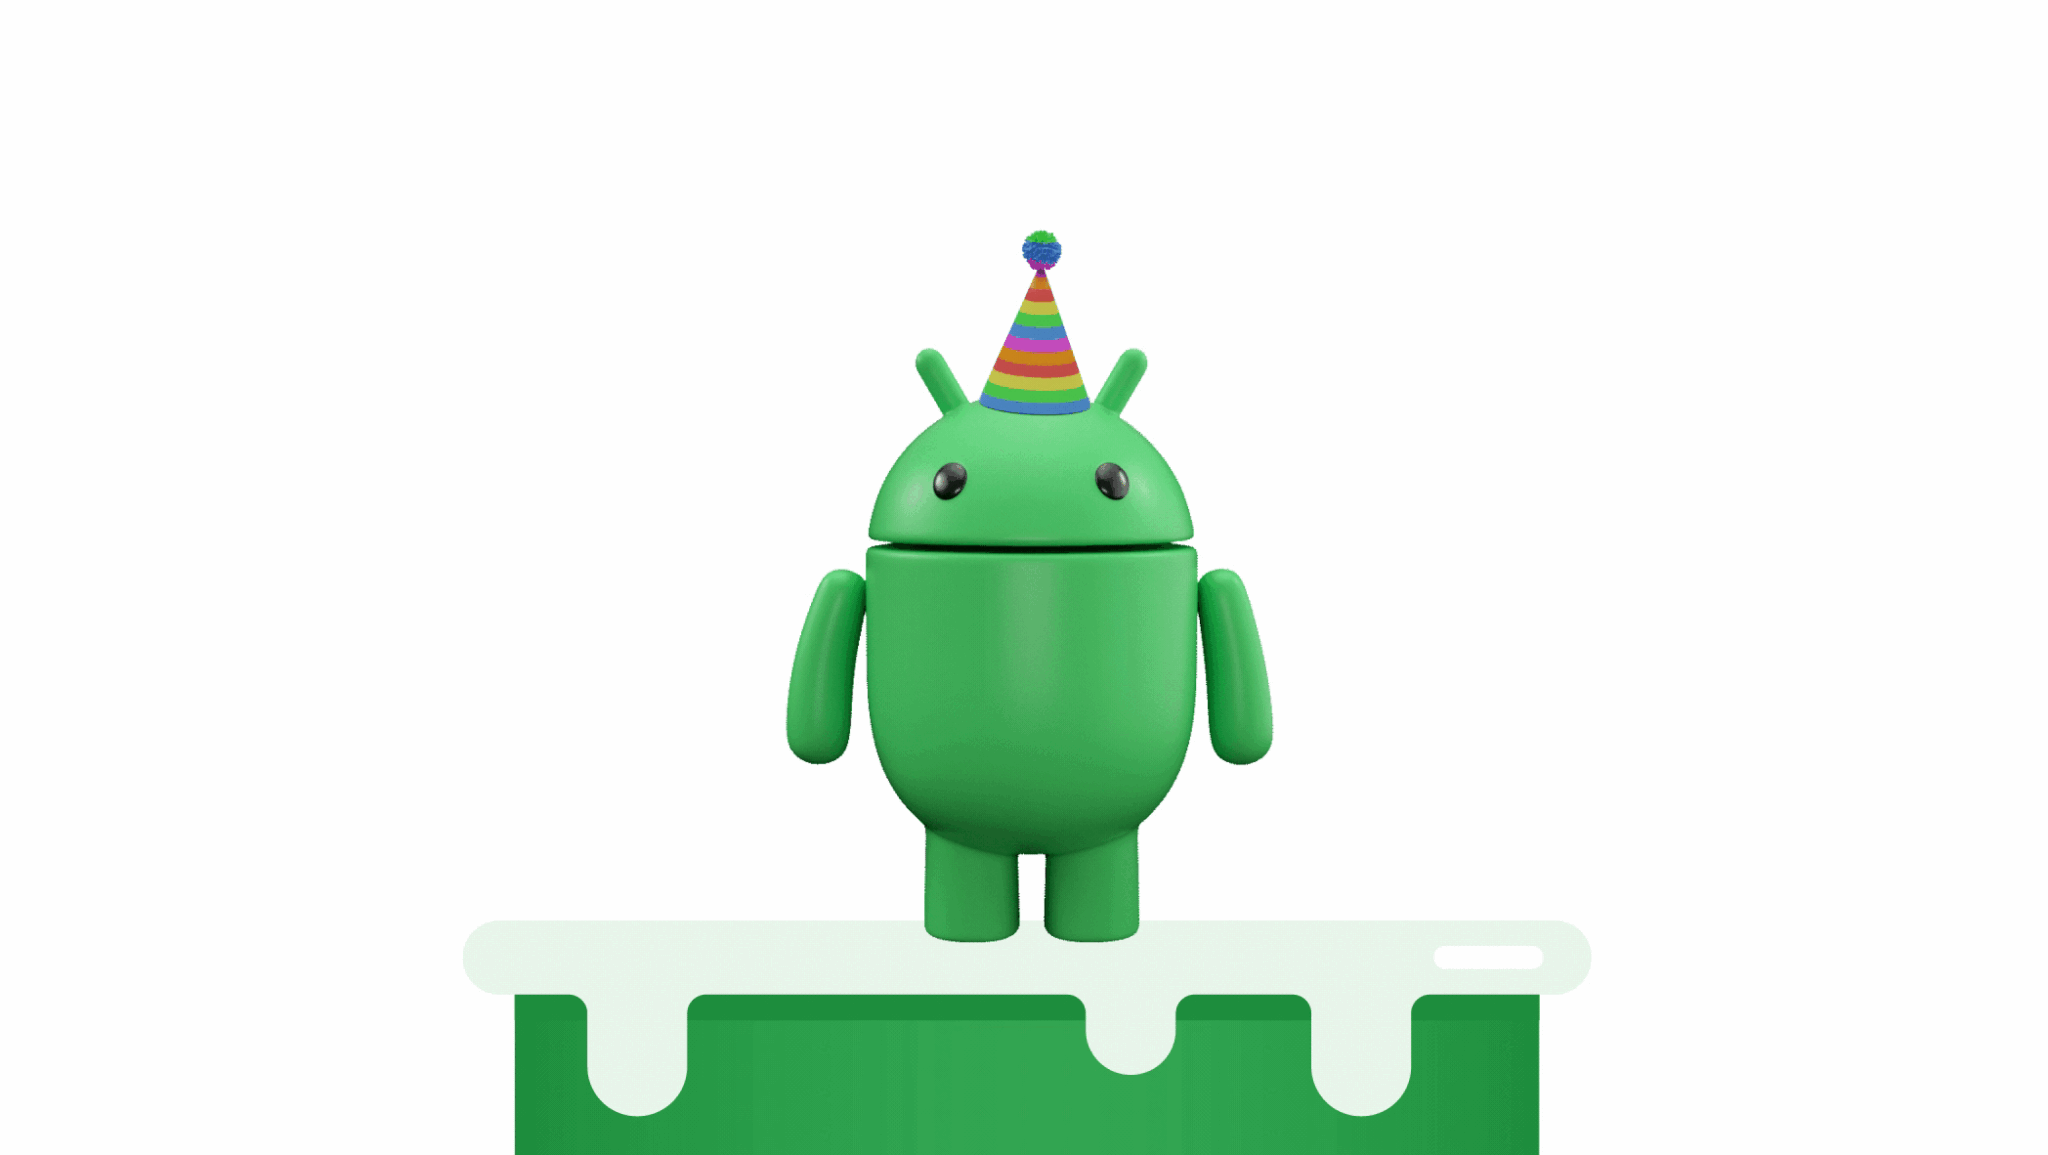 15 years of Android memories